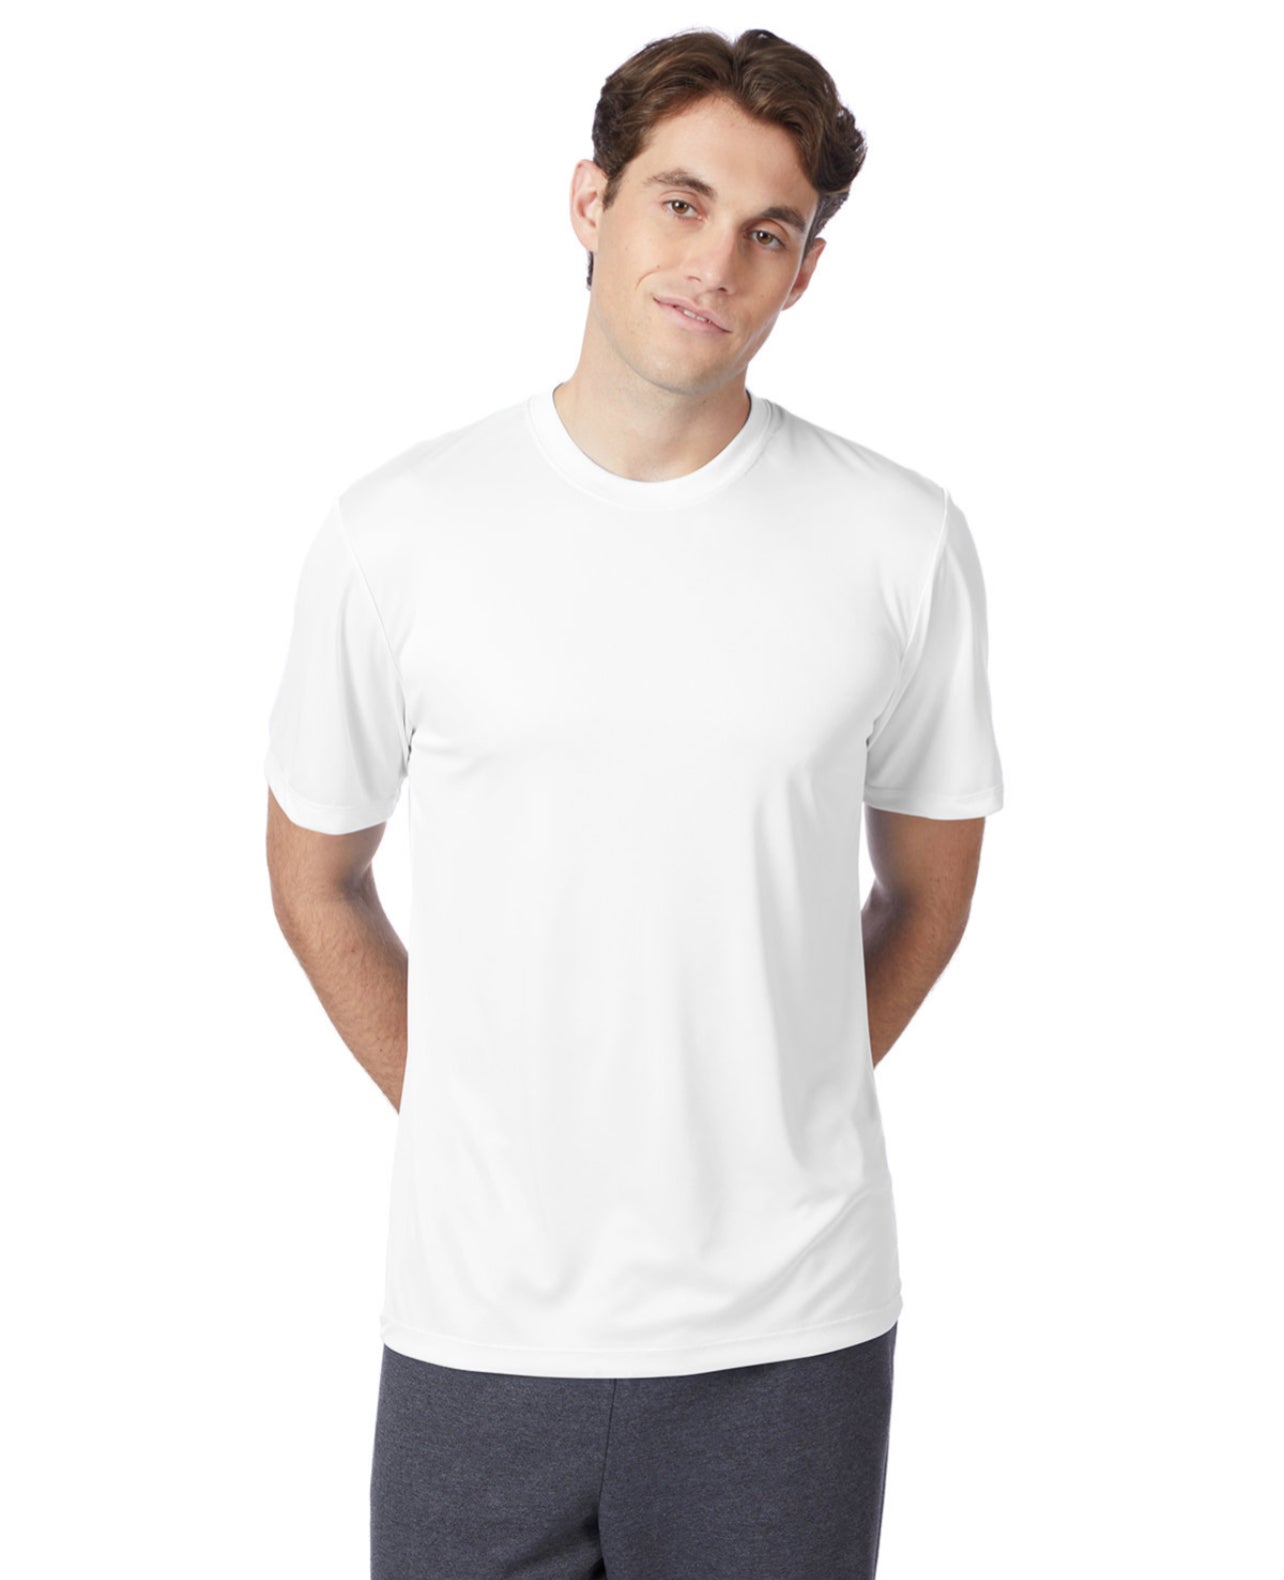 Cool Dry Fit T-shirt